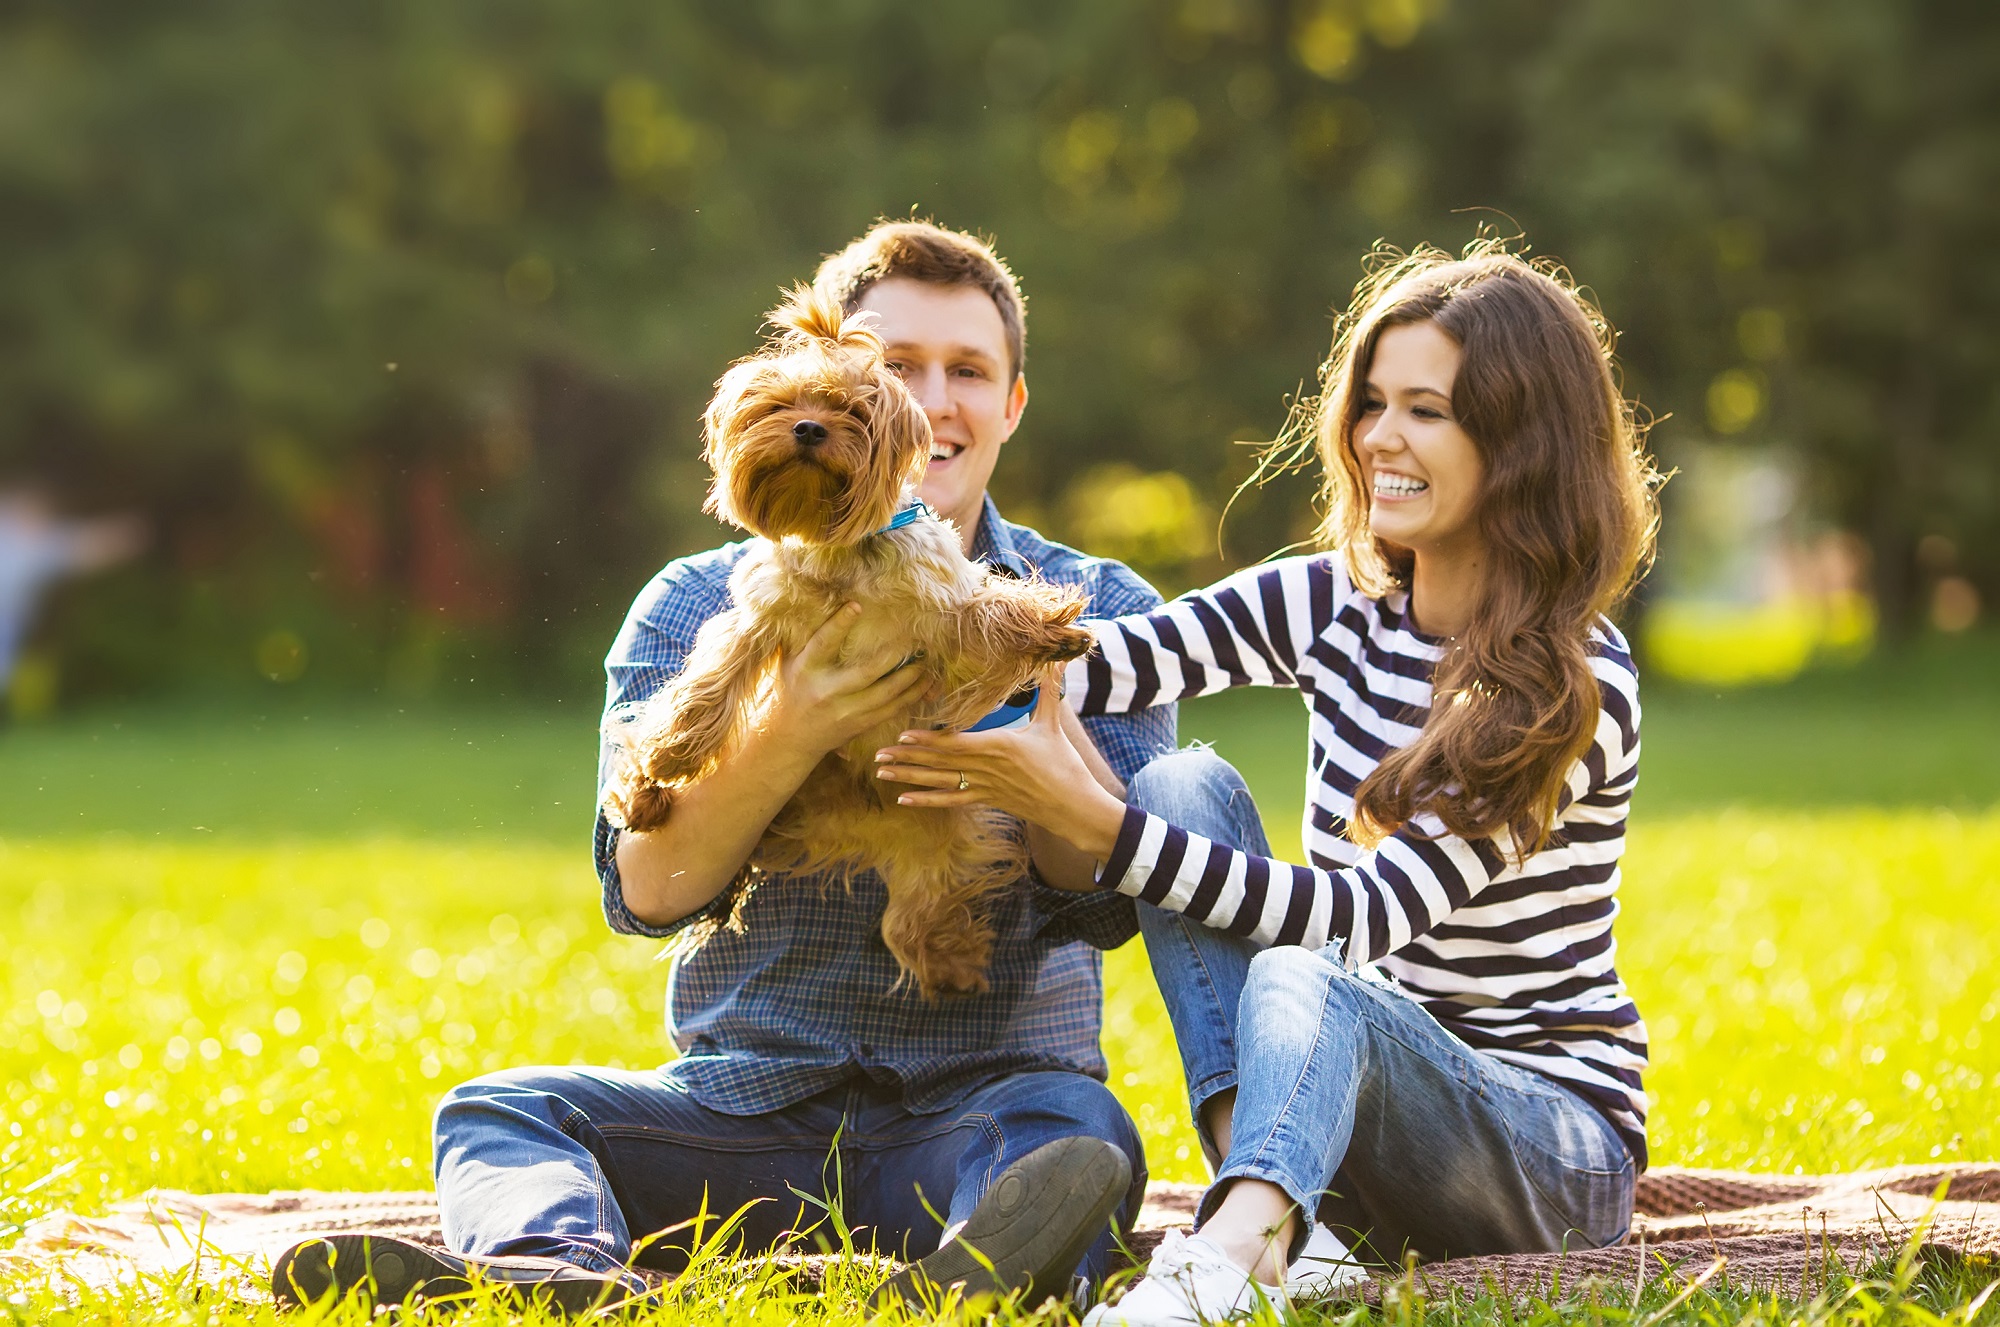 Man and woman smiling playing with dog on blanket in the park